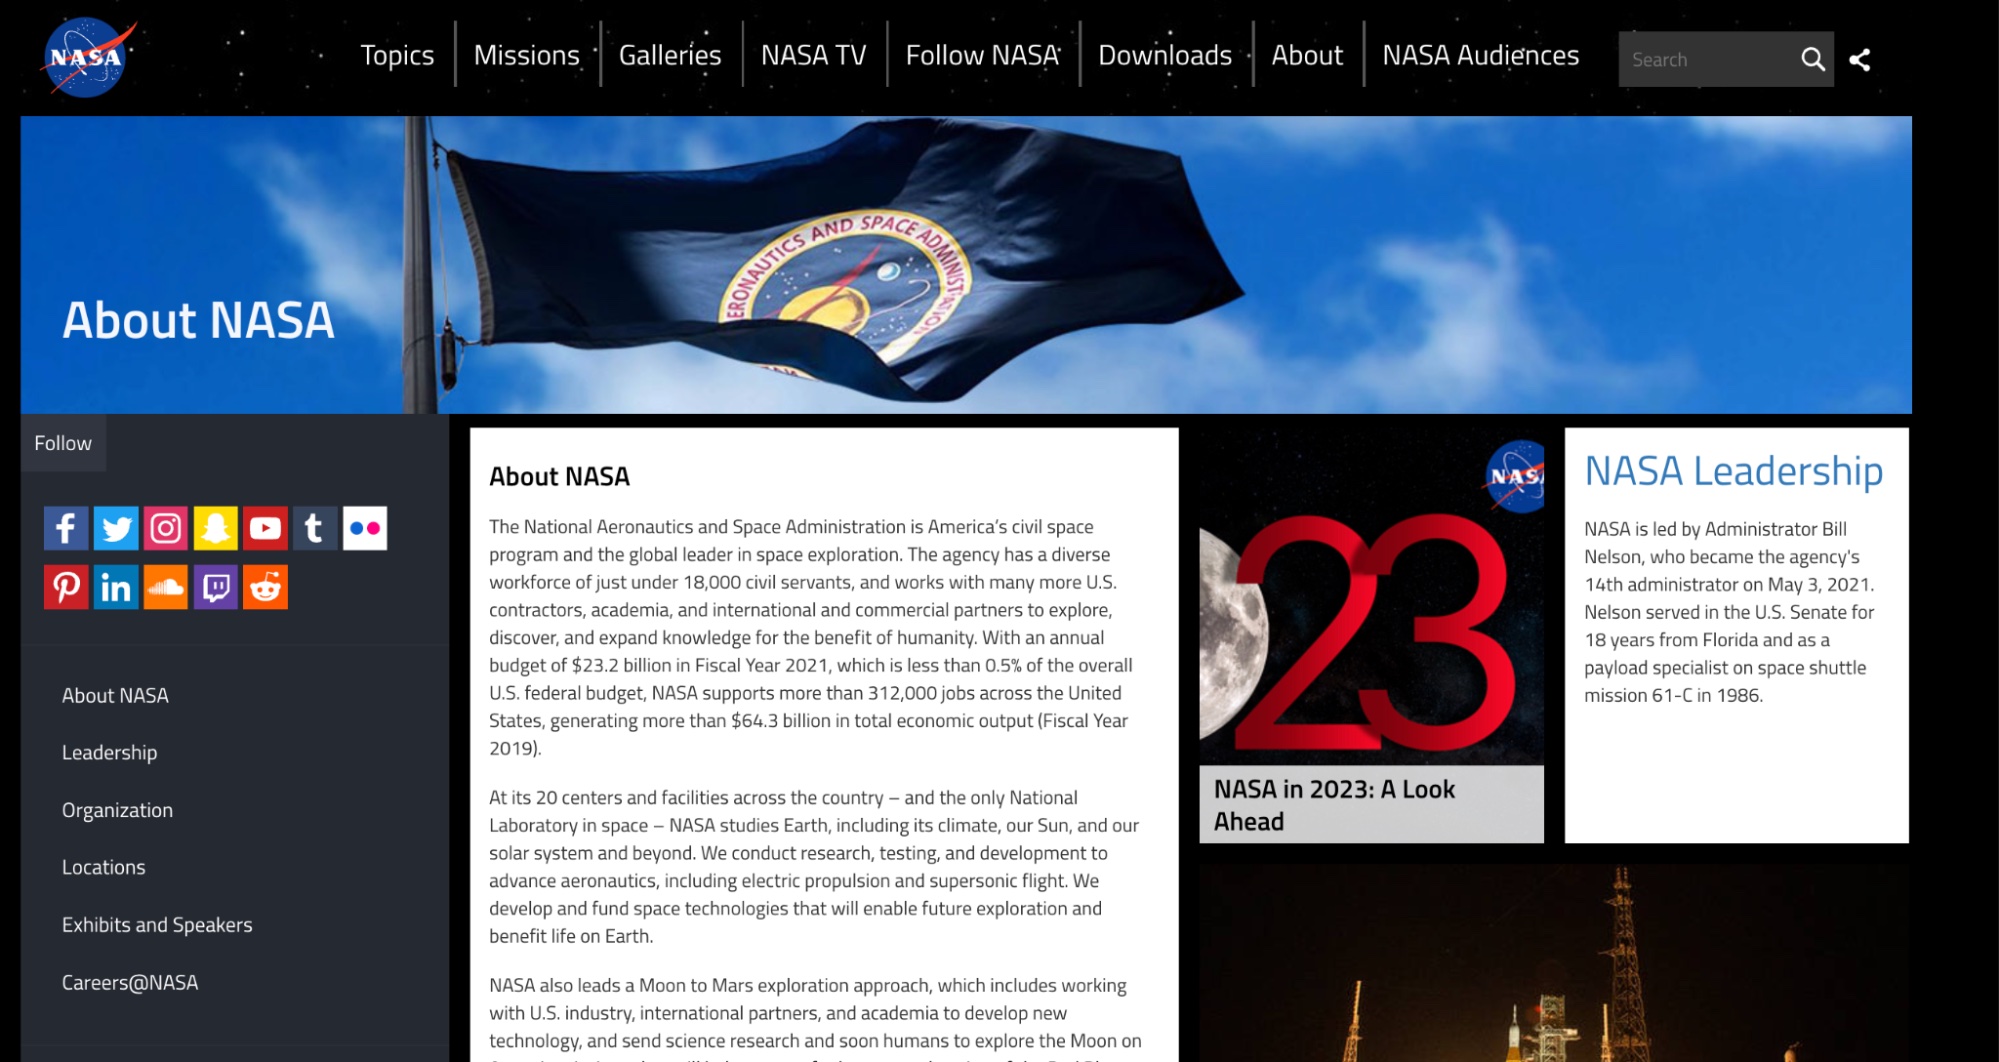 Screenshot of NASA's About Us page, providing information about the agency's mission, vision, and history.